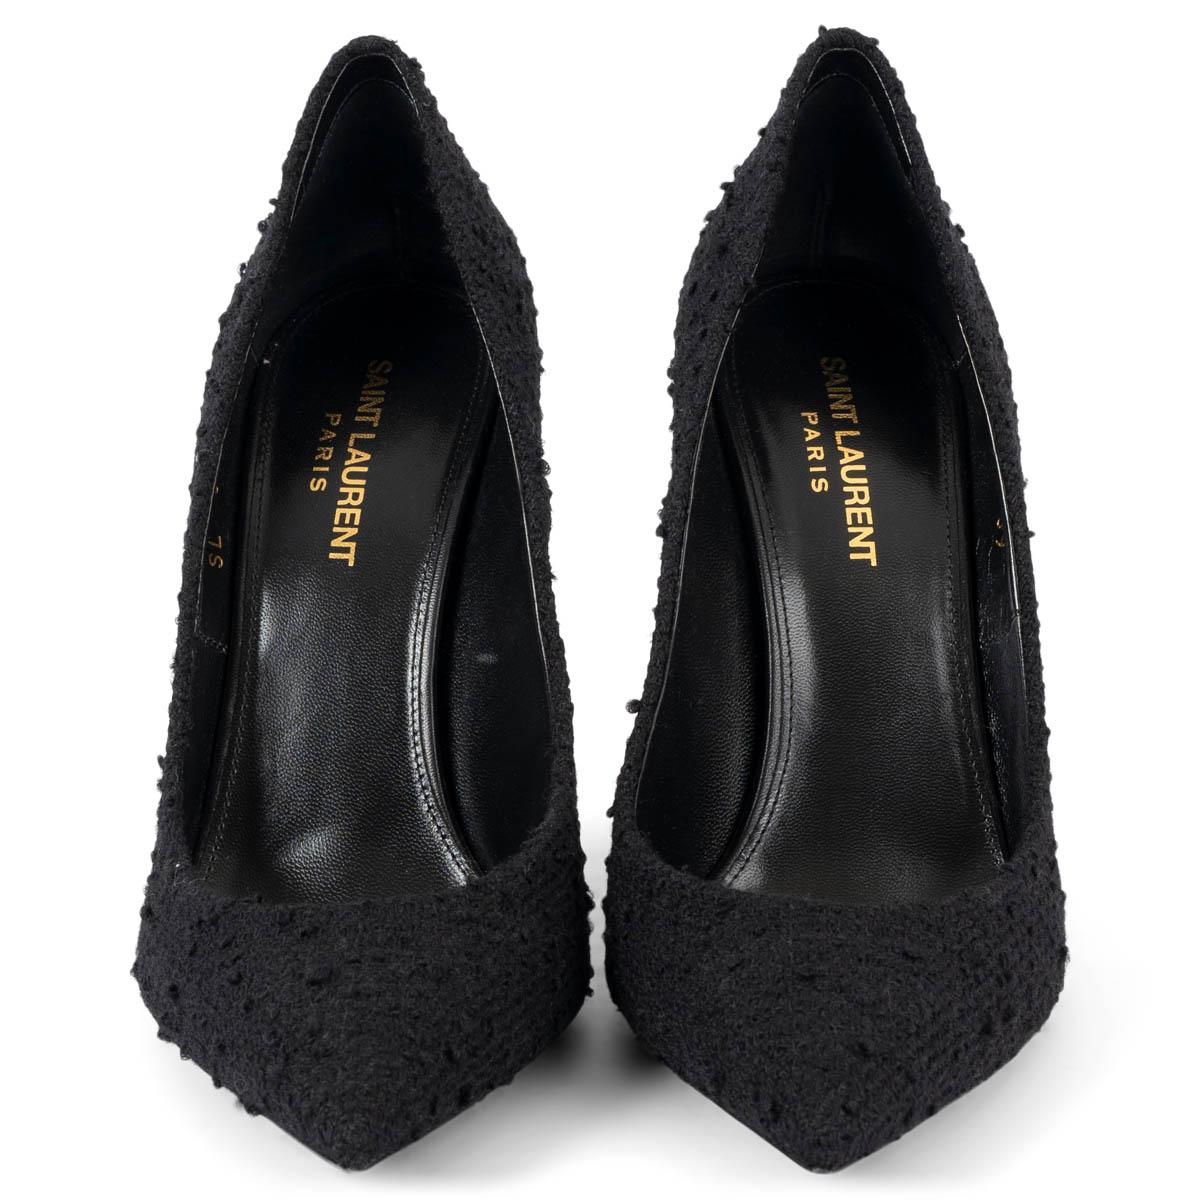 100% authentic Saint Laurent Anja 105 pumps in black bouclé. Features a pointed toe and bouclé covered stiletto heel. Brand new. Come with dust bag. 

Measurements
Imprinted Size	39
Shoe Size	39
Inside Sole	26cm (10.1in)
Width	7.5cm